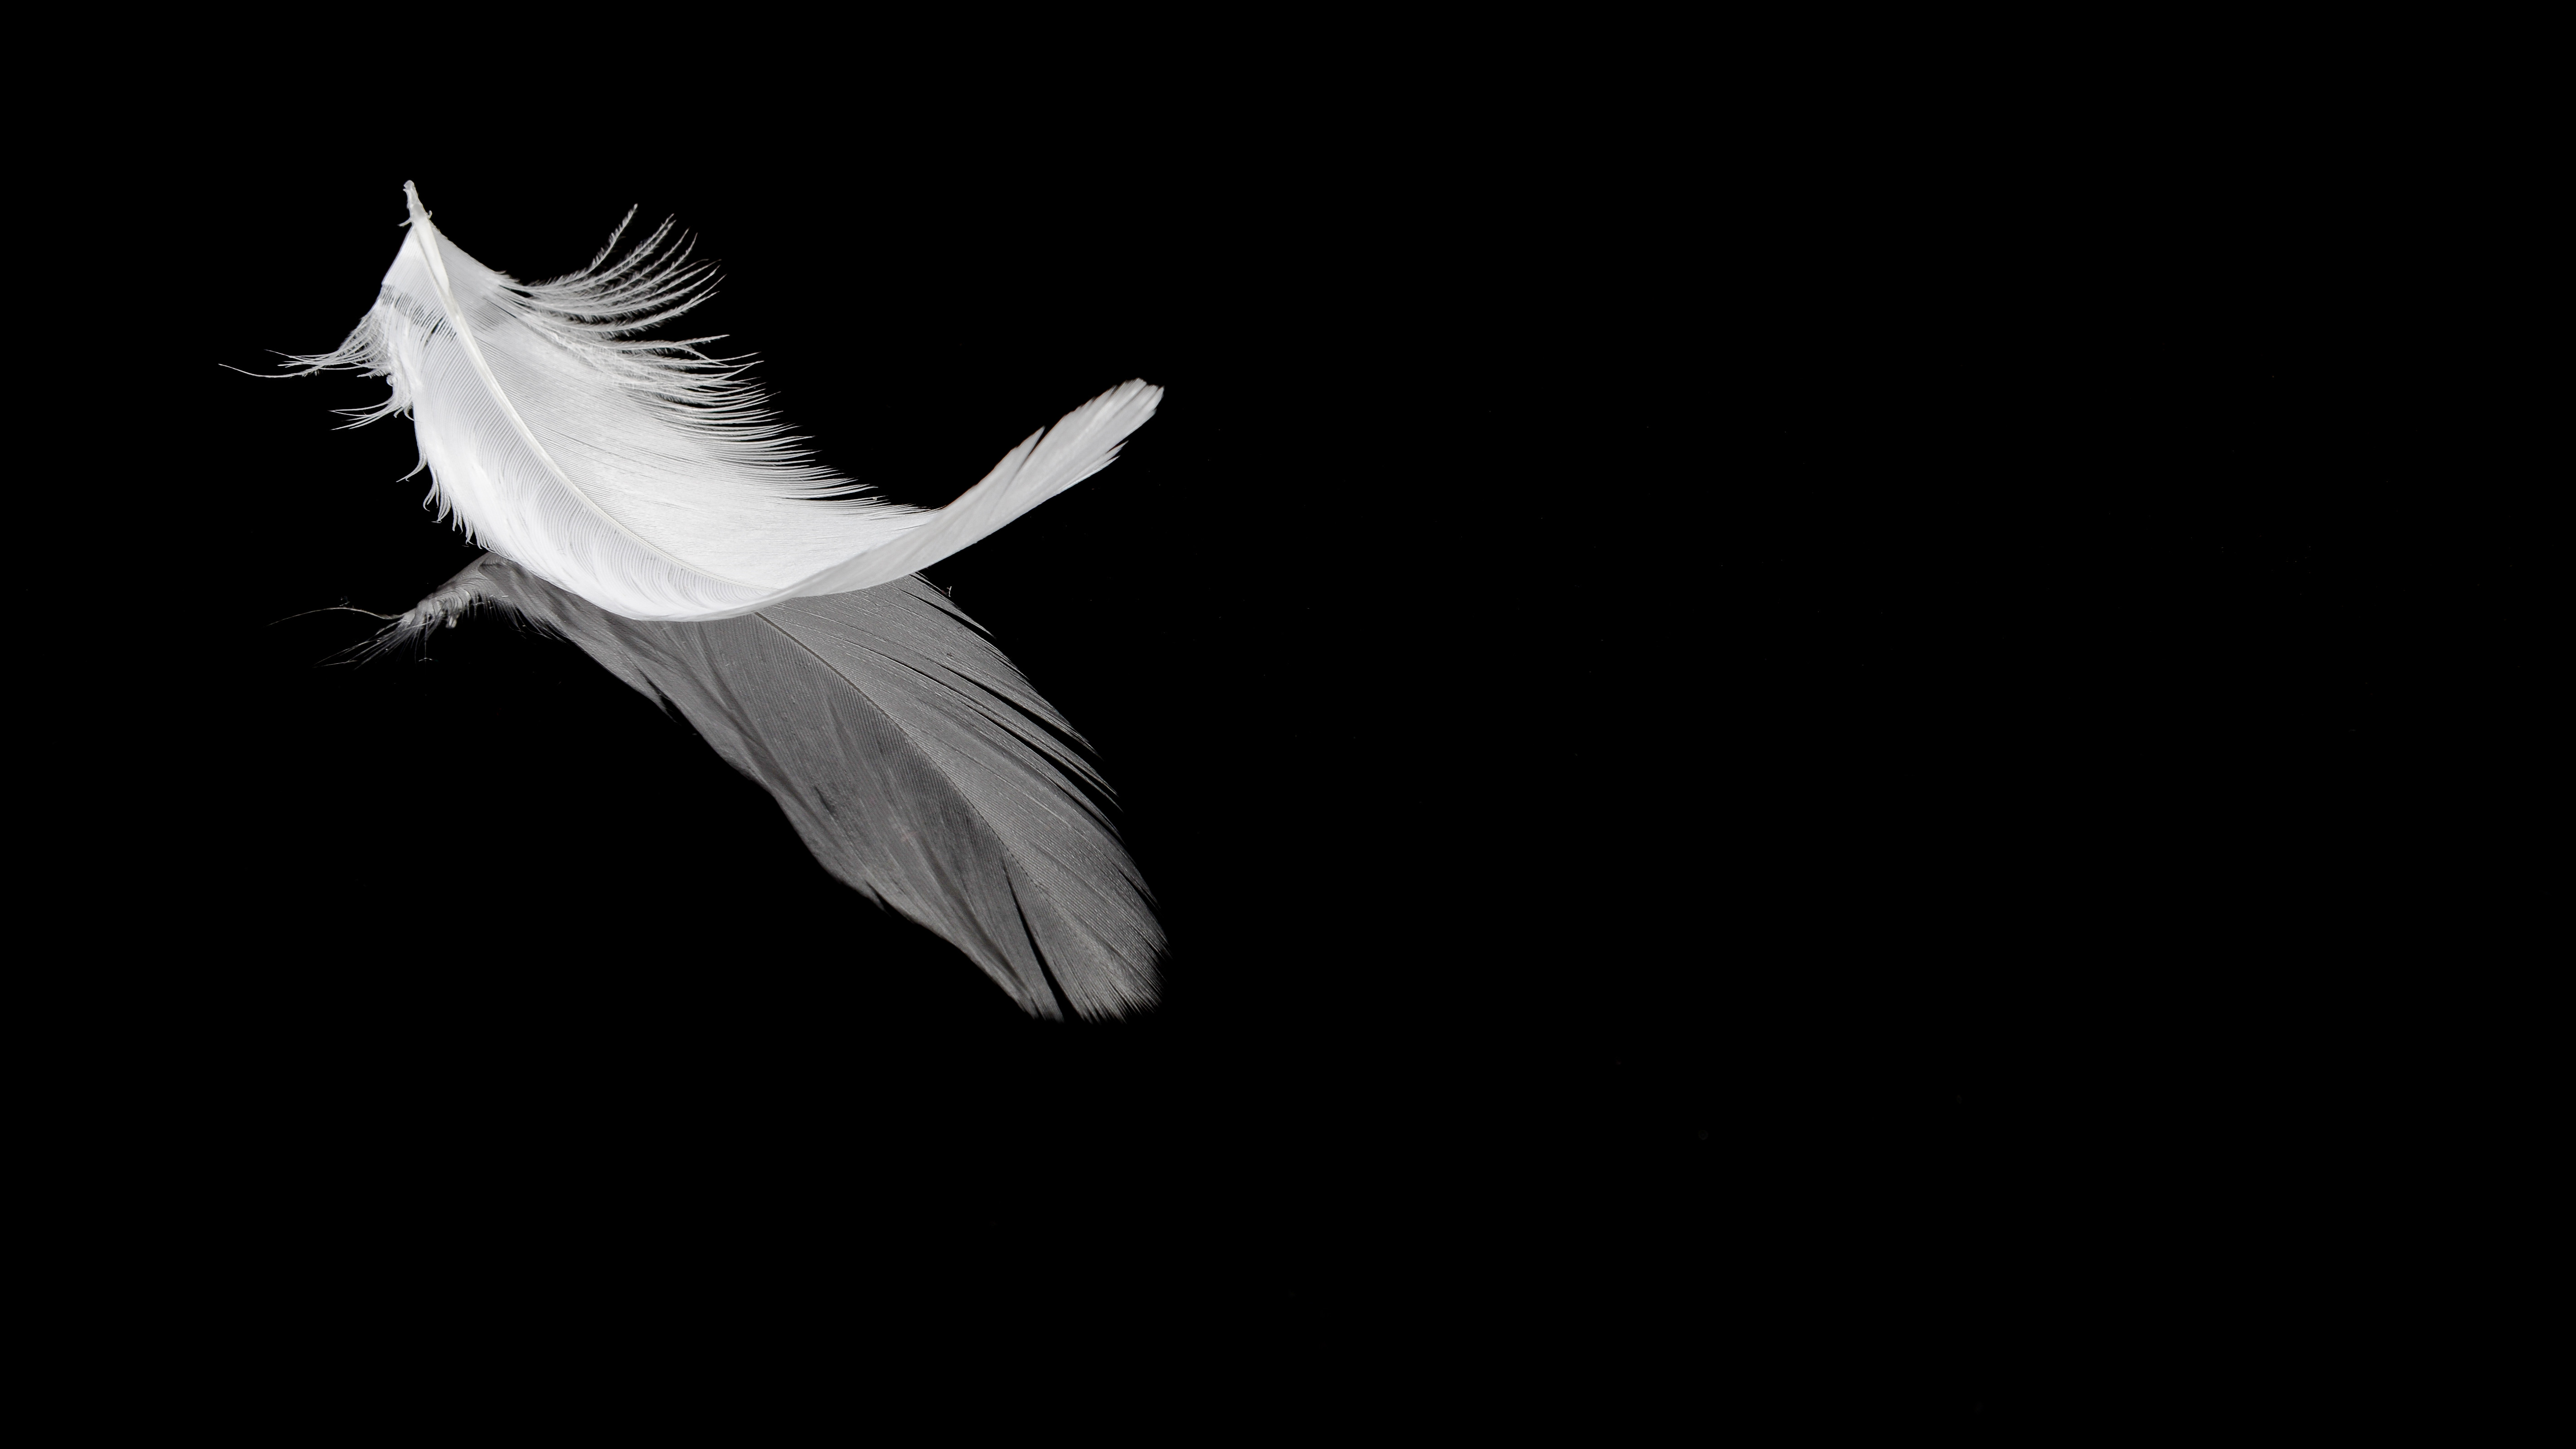 61904 Screensavers and Wallpapers Pen for phone. Download feather, black, reflection, bw, chb, pen pictures for free